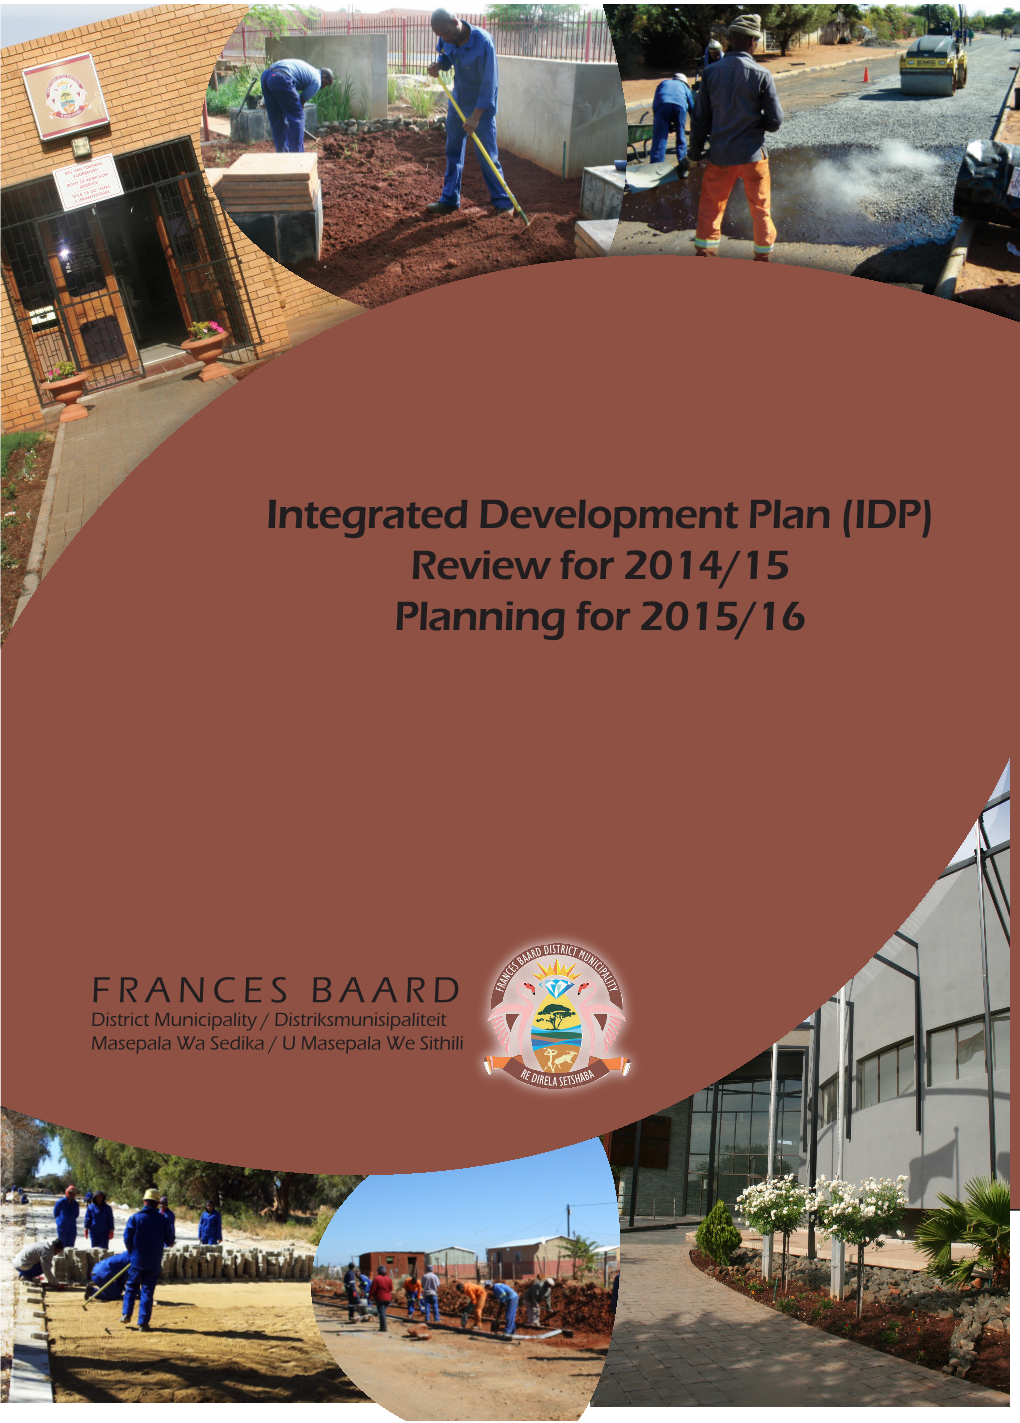 IDP) Review for 2014/15 Planning for 2015/16